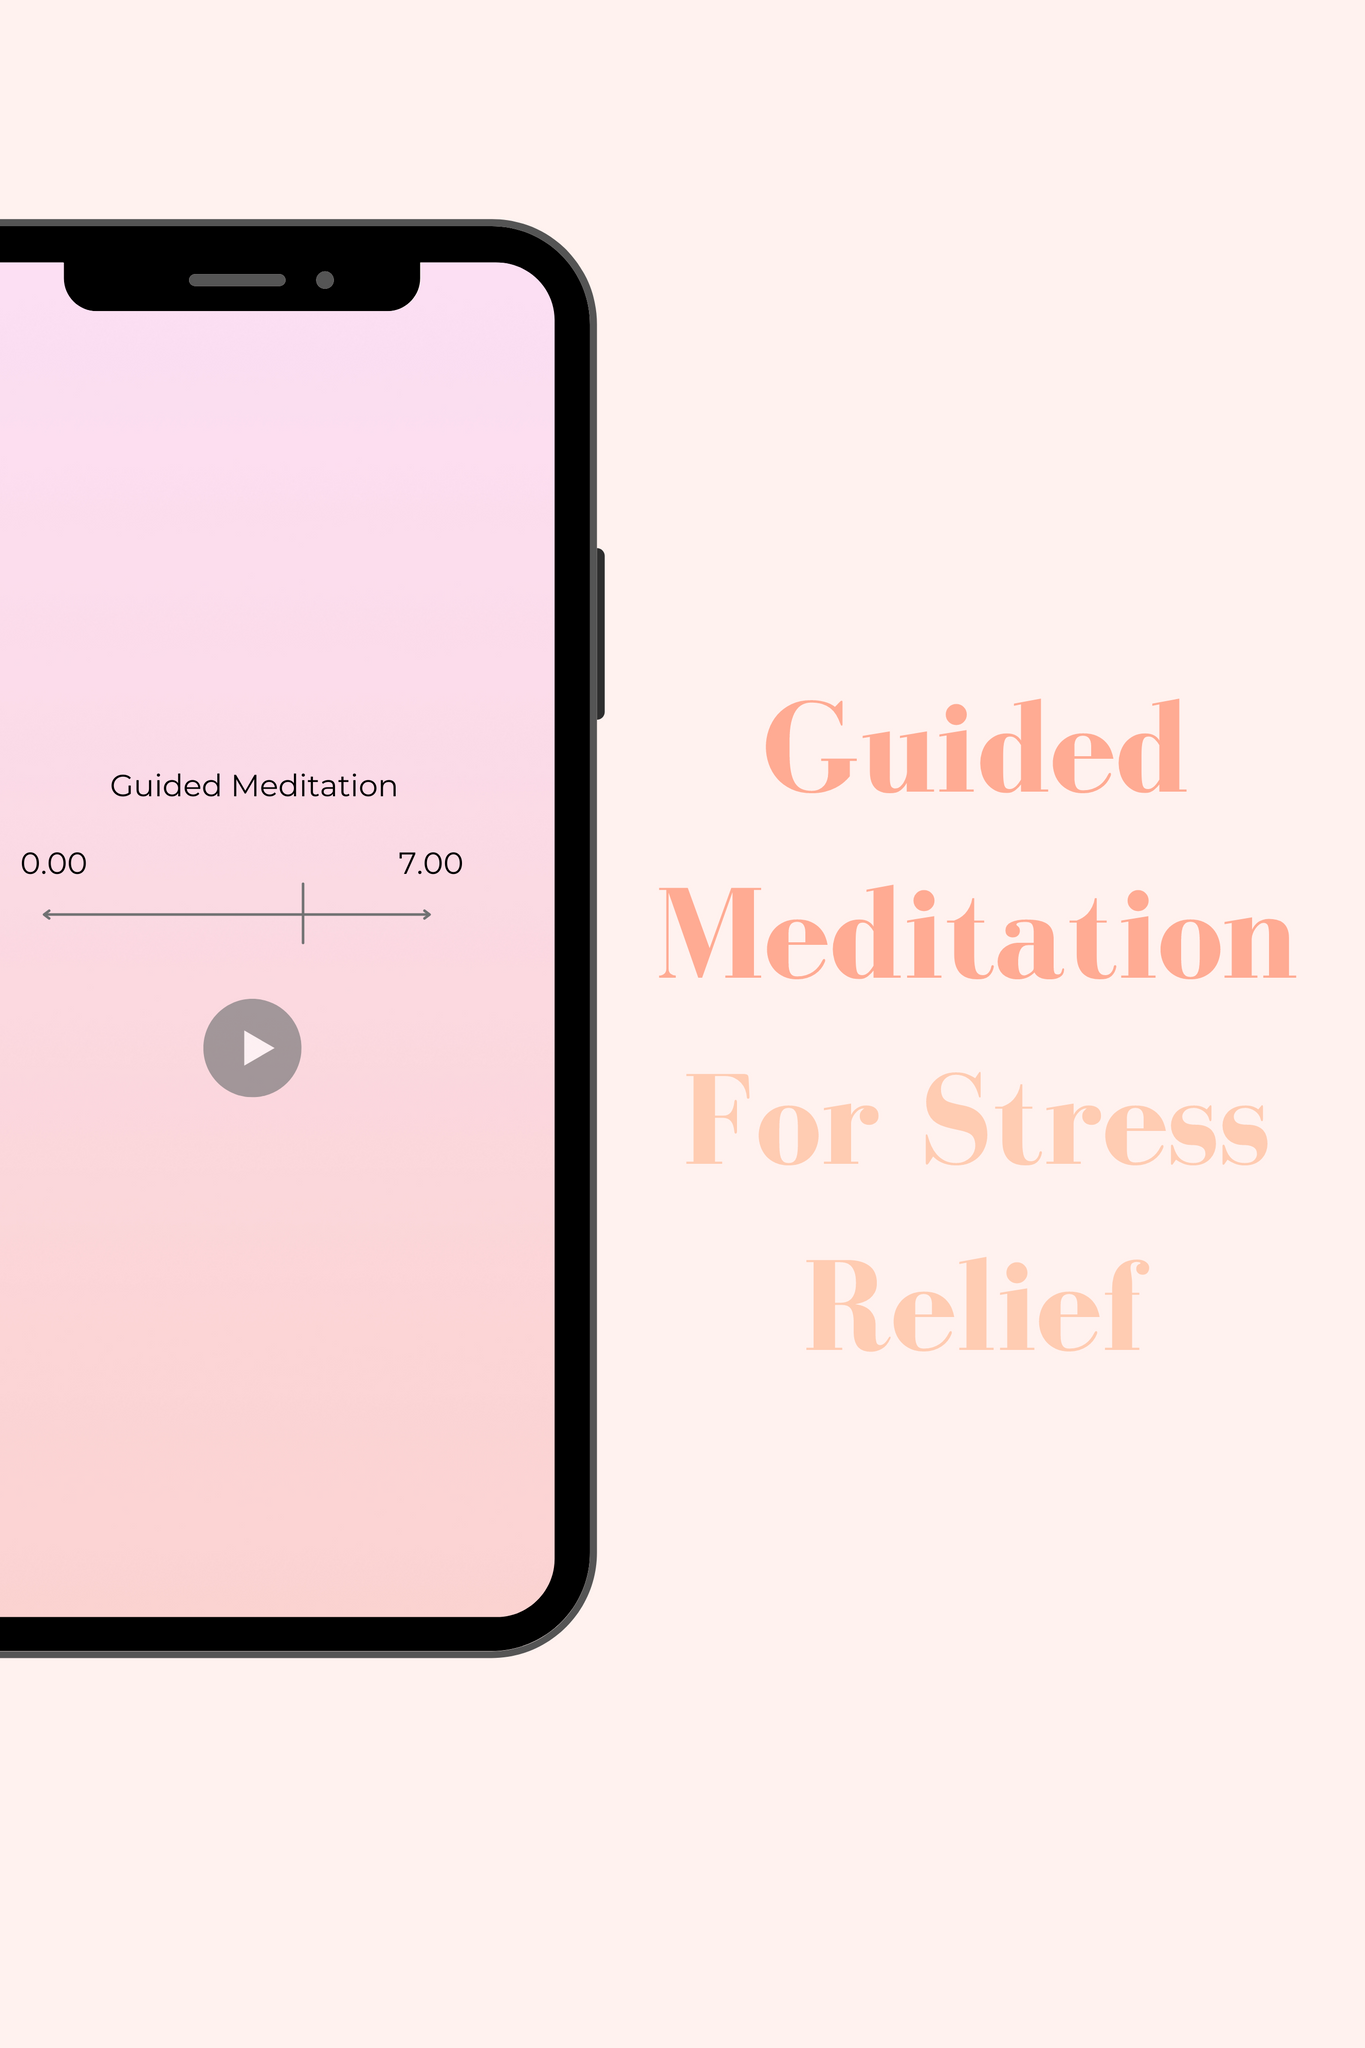 Guided Meditation For Stress Relief